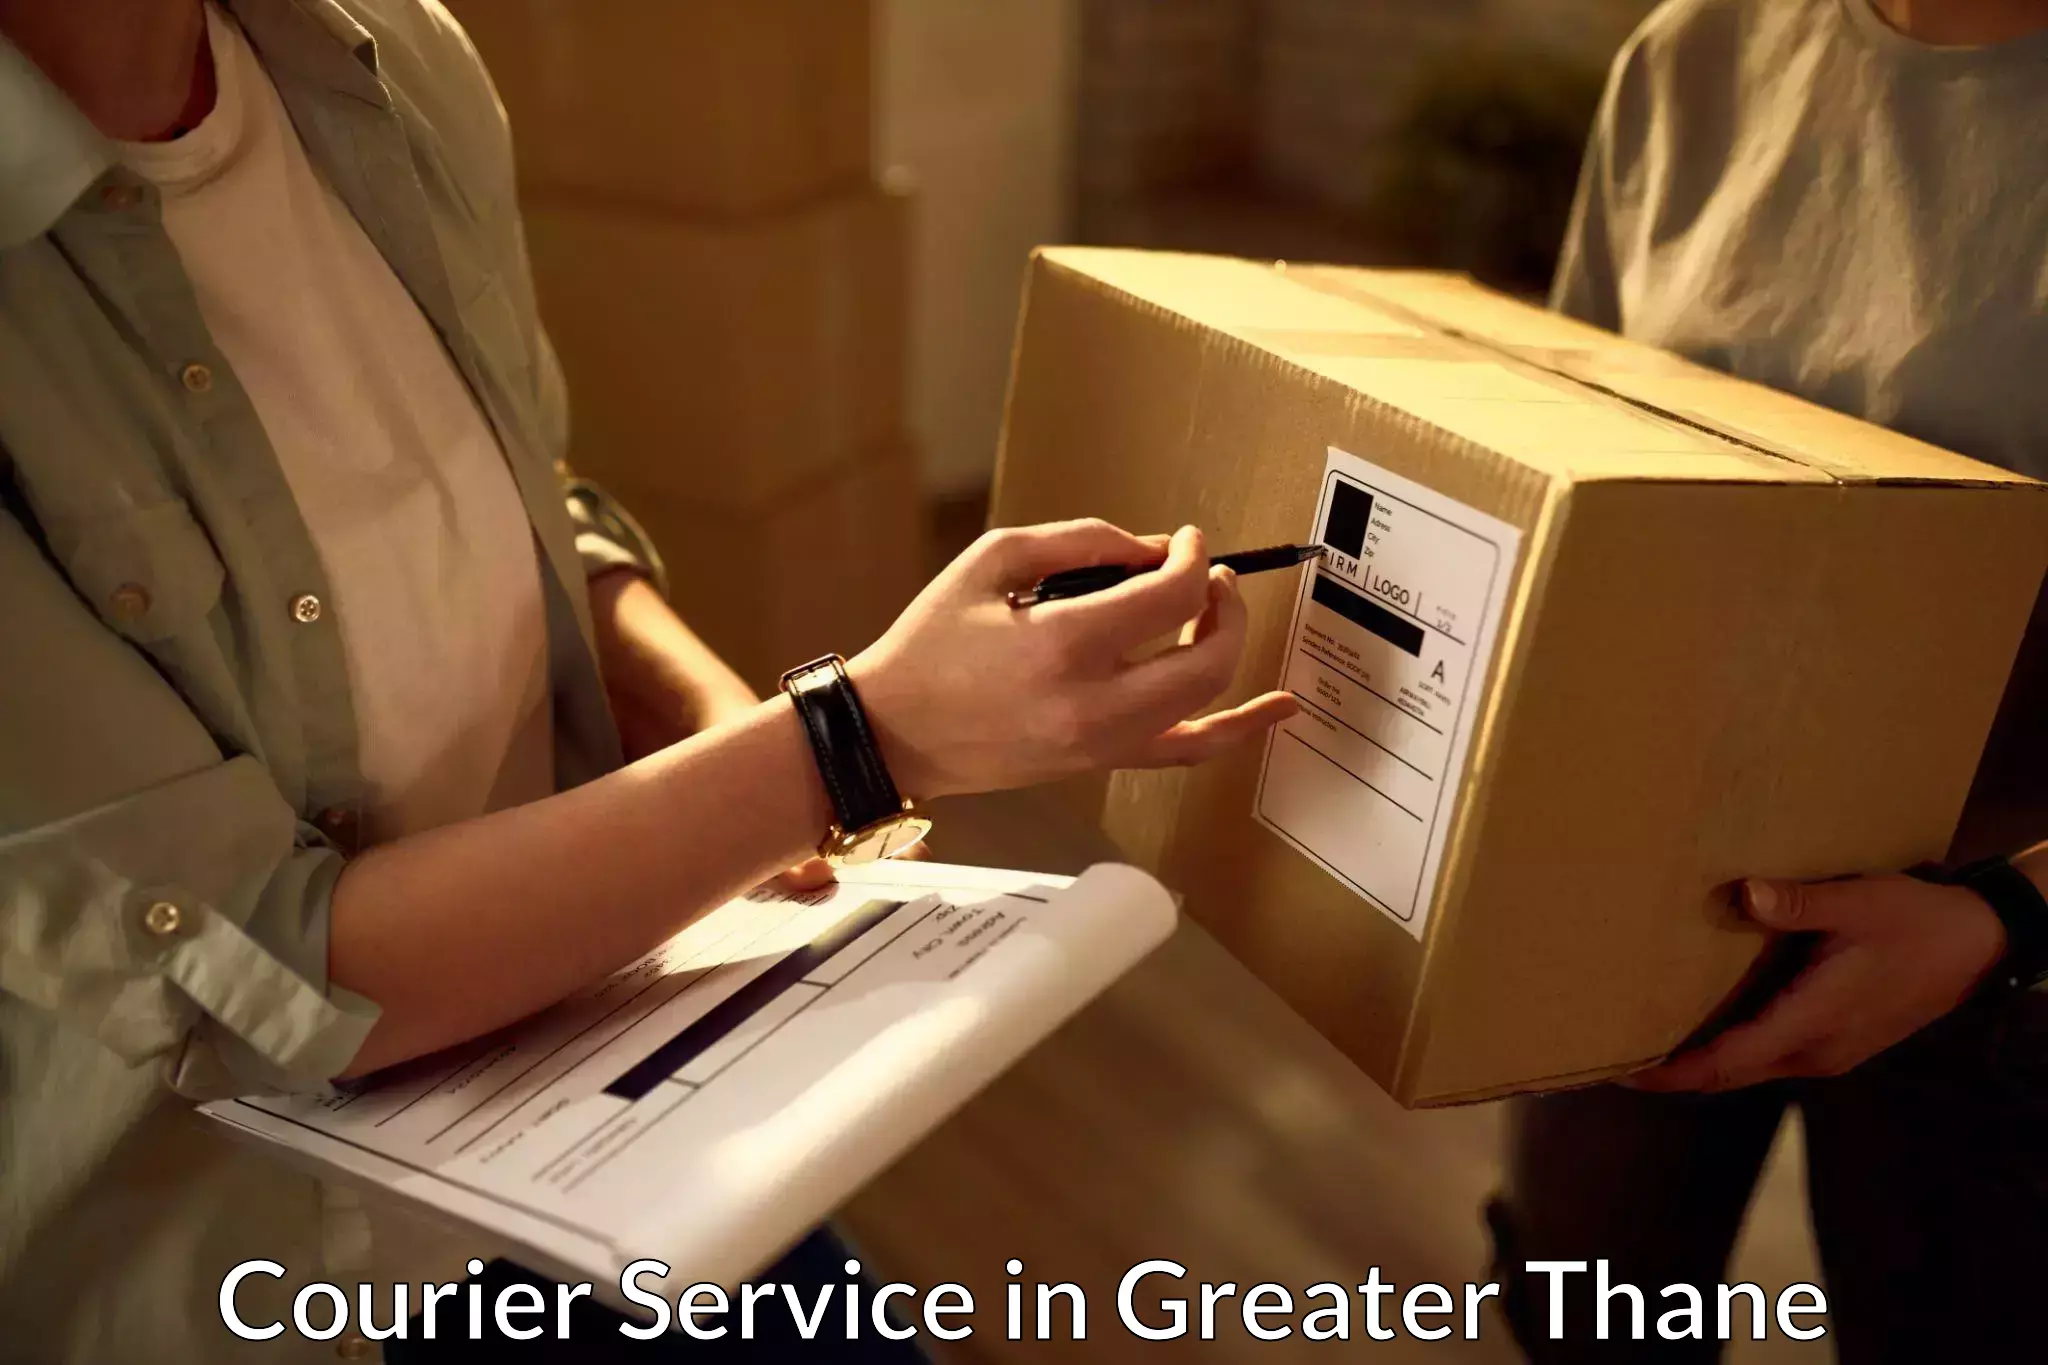 Same-day delivery solutions in Greater Thane